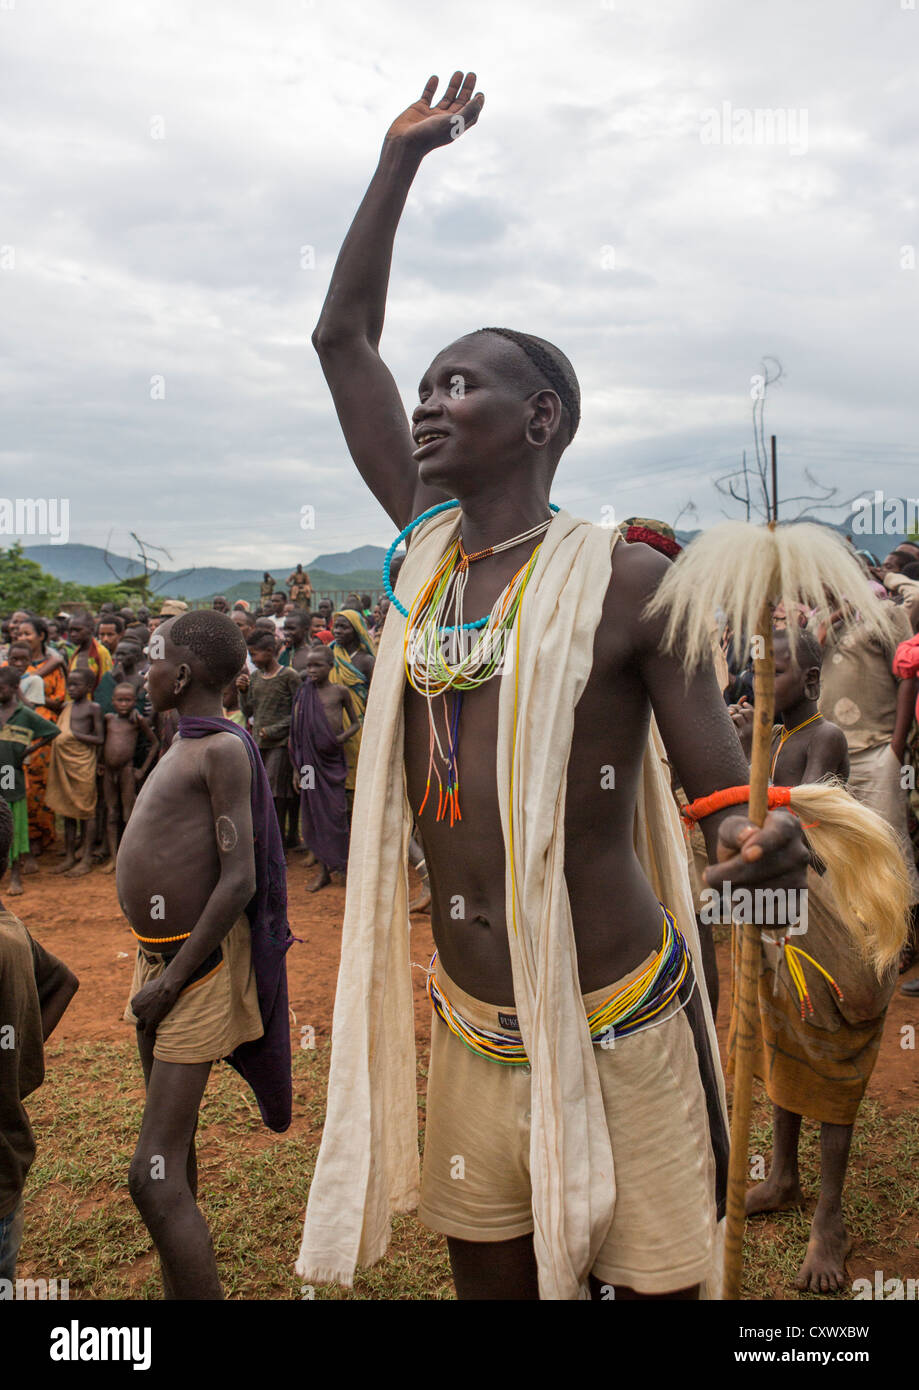 Suri Tribe Man Dancing At A Ceremony Organized By The Government, Kibish, Omo Valley, Ethiopia Stock Photo